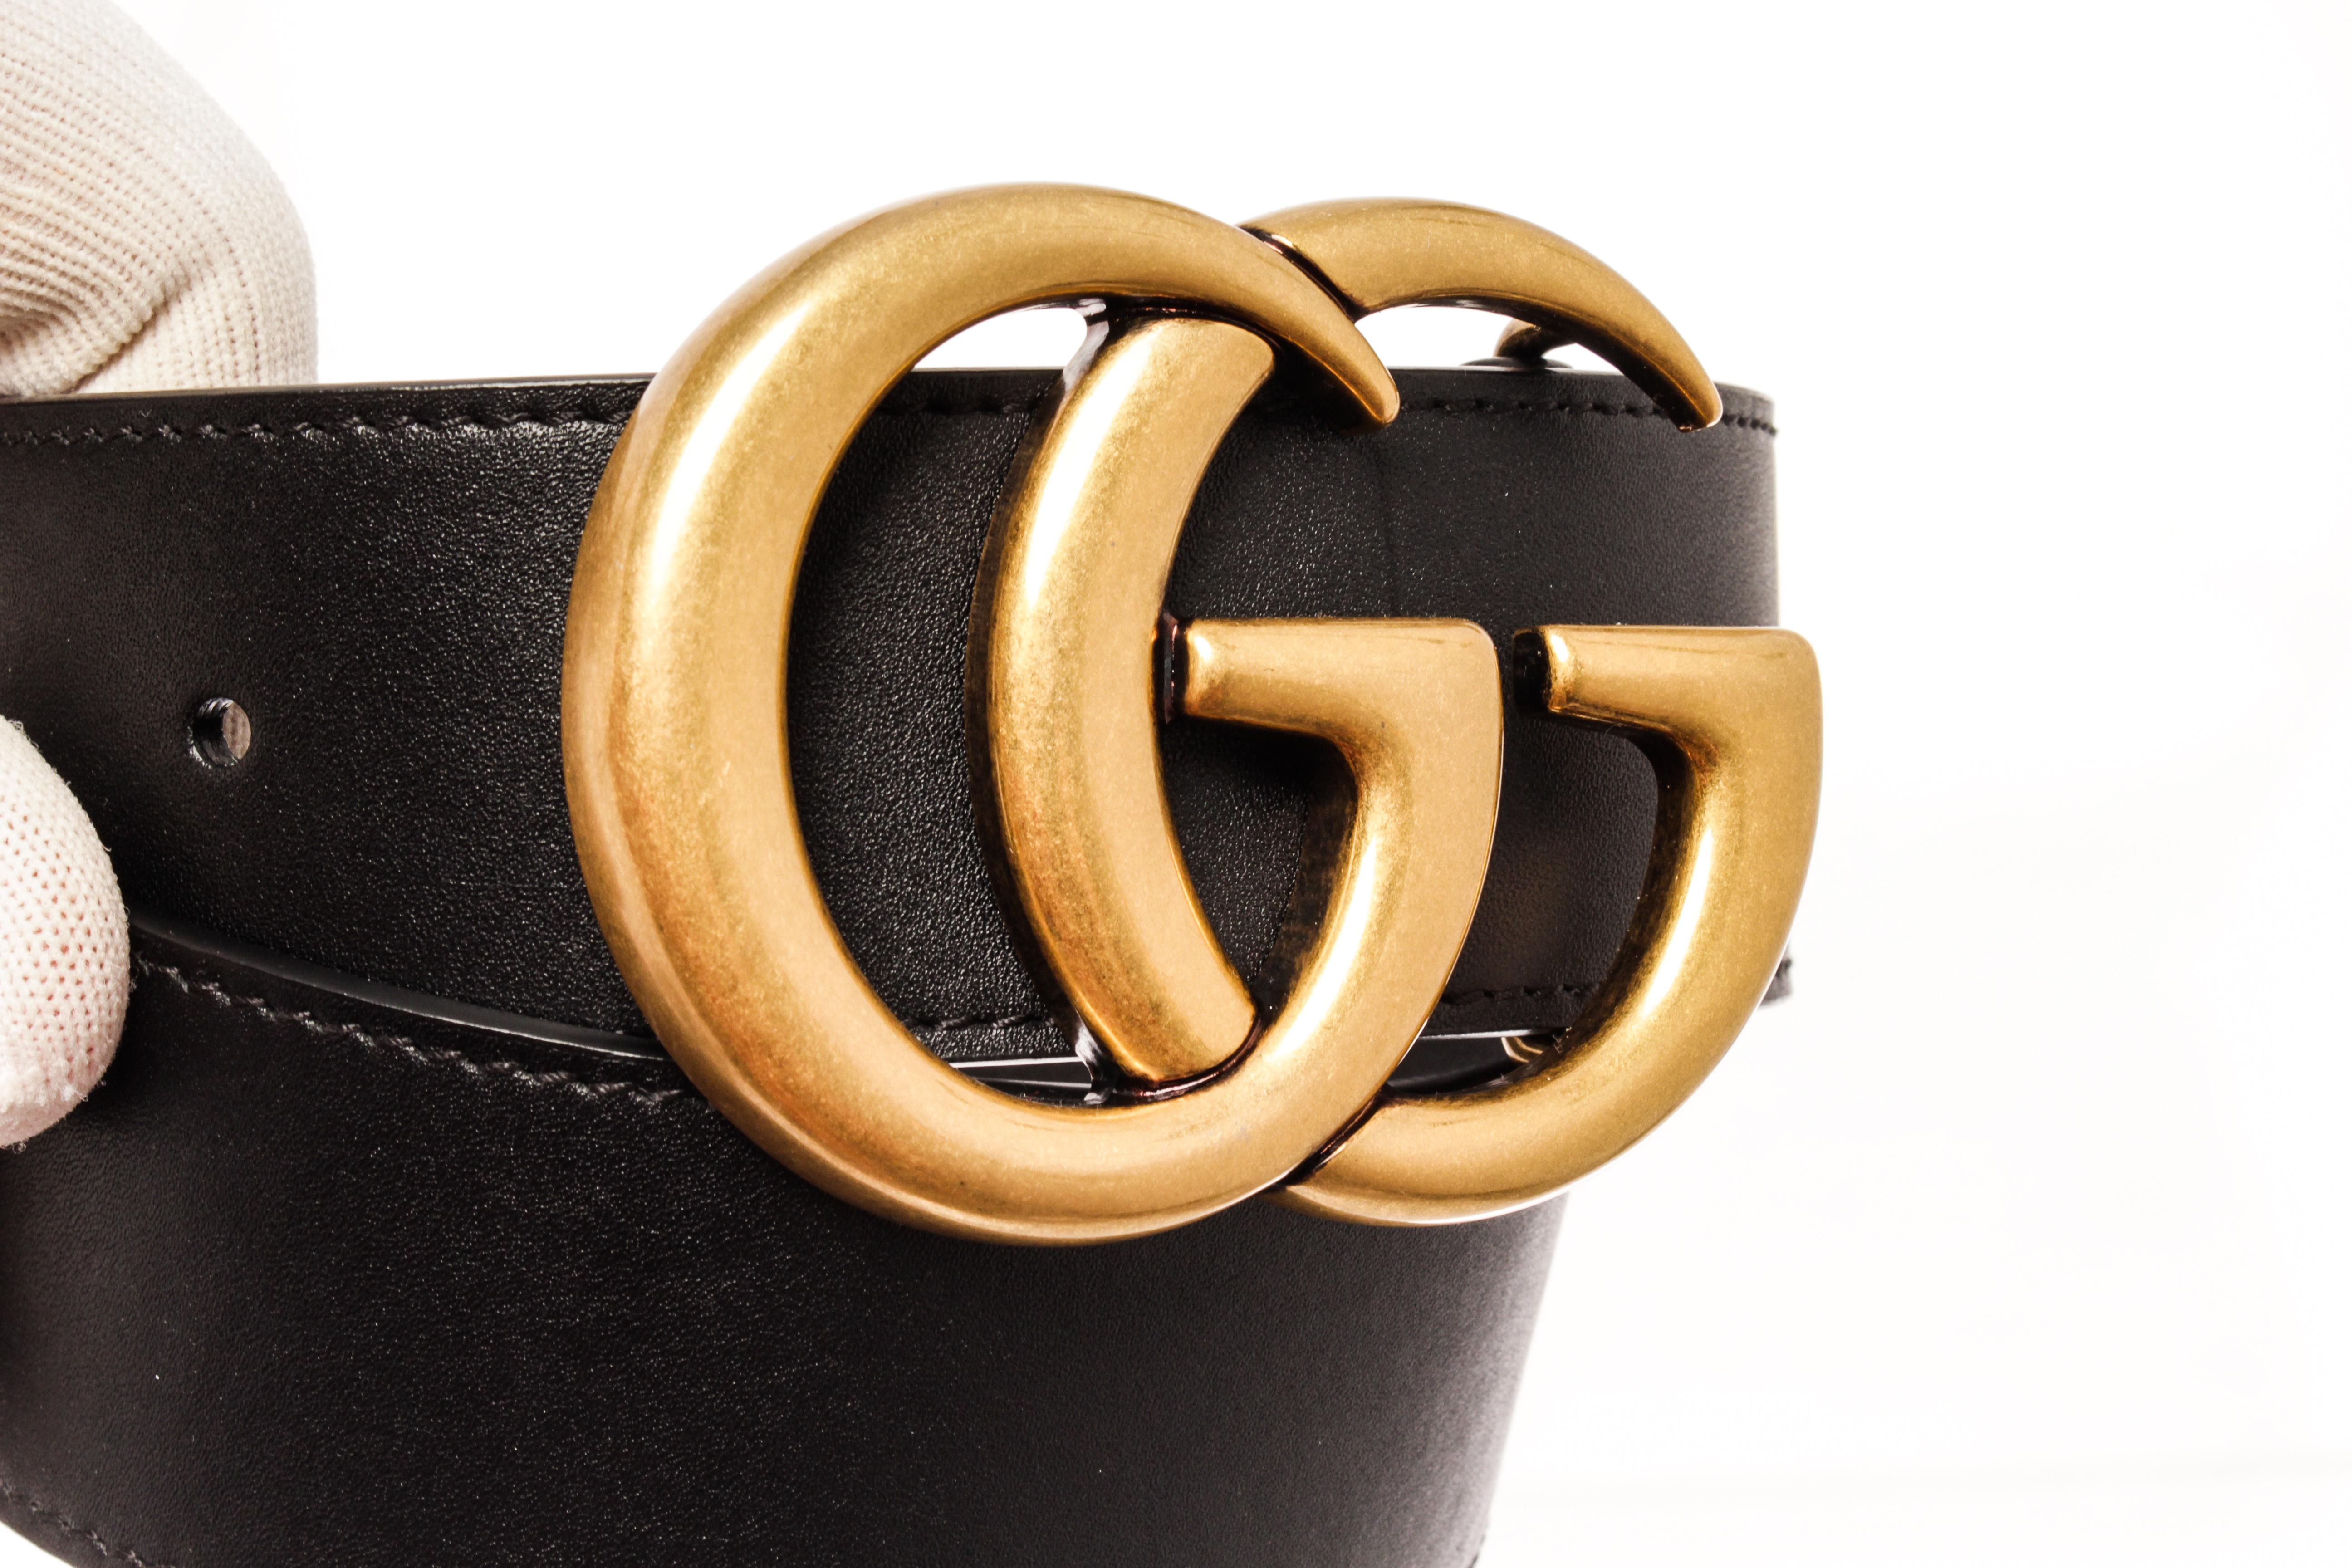 Gucci Black Leather Gold Wide Double GG Logo Belt 70 with material leather, gold-tone hardware and turn-lock closure, with double gg logo.

440309MSC